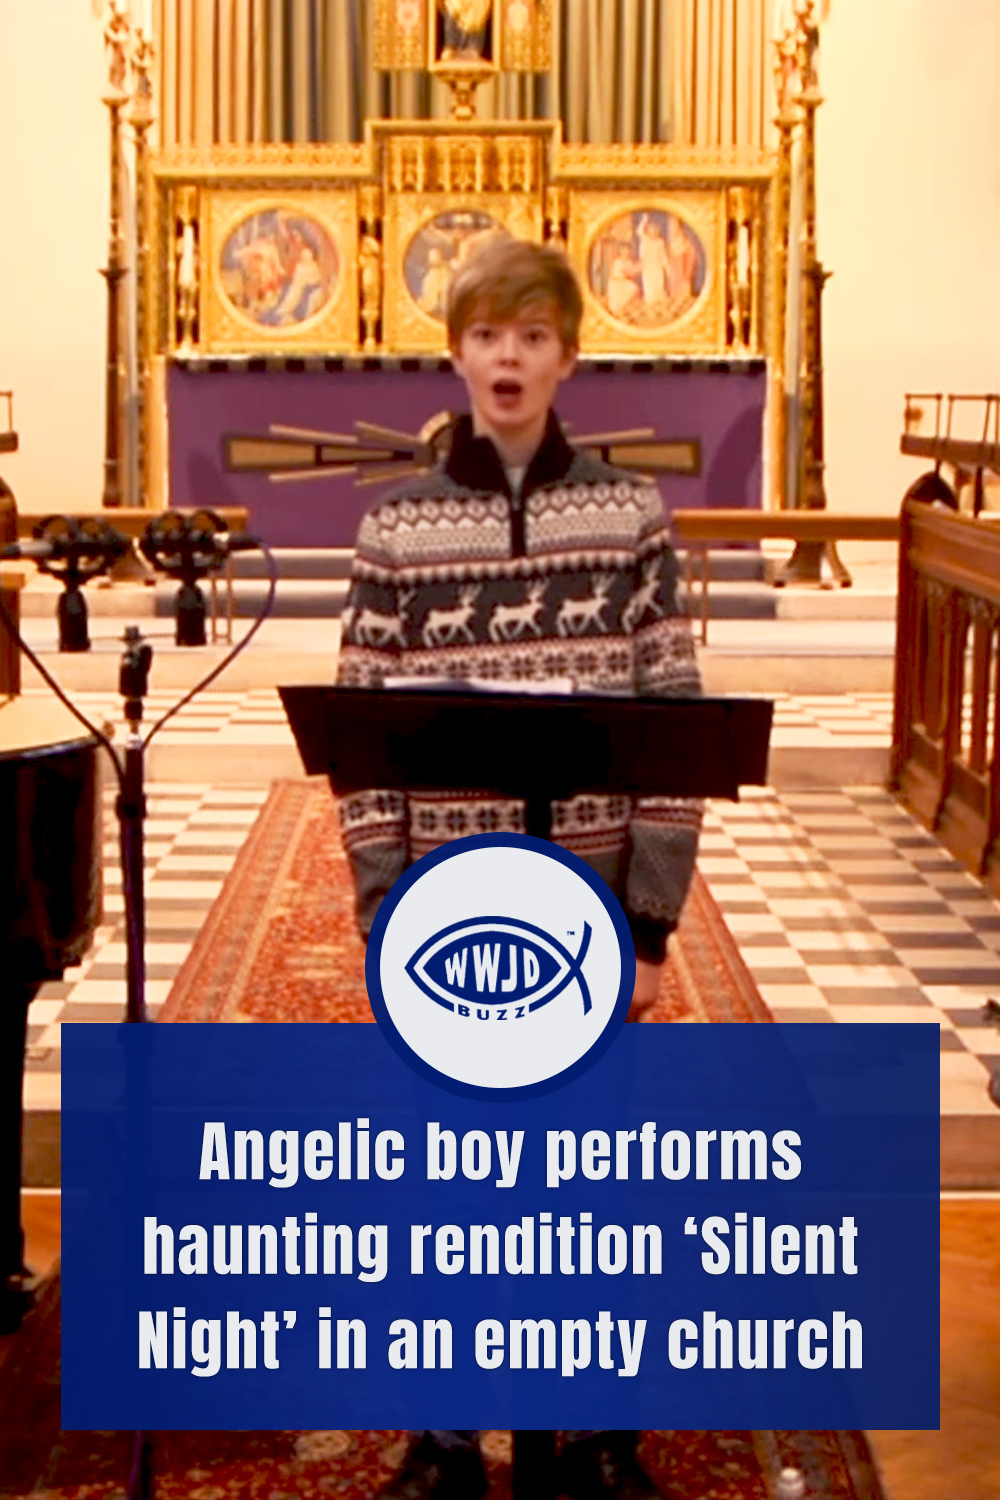 Angelic boy performs haunting rendition ‘Silent Night’ in an empty church